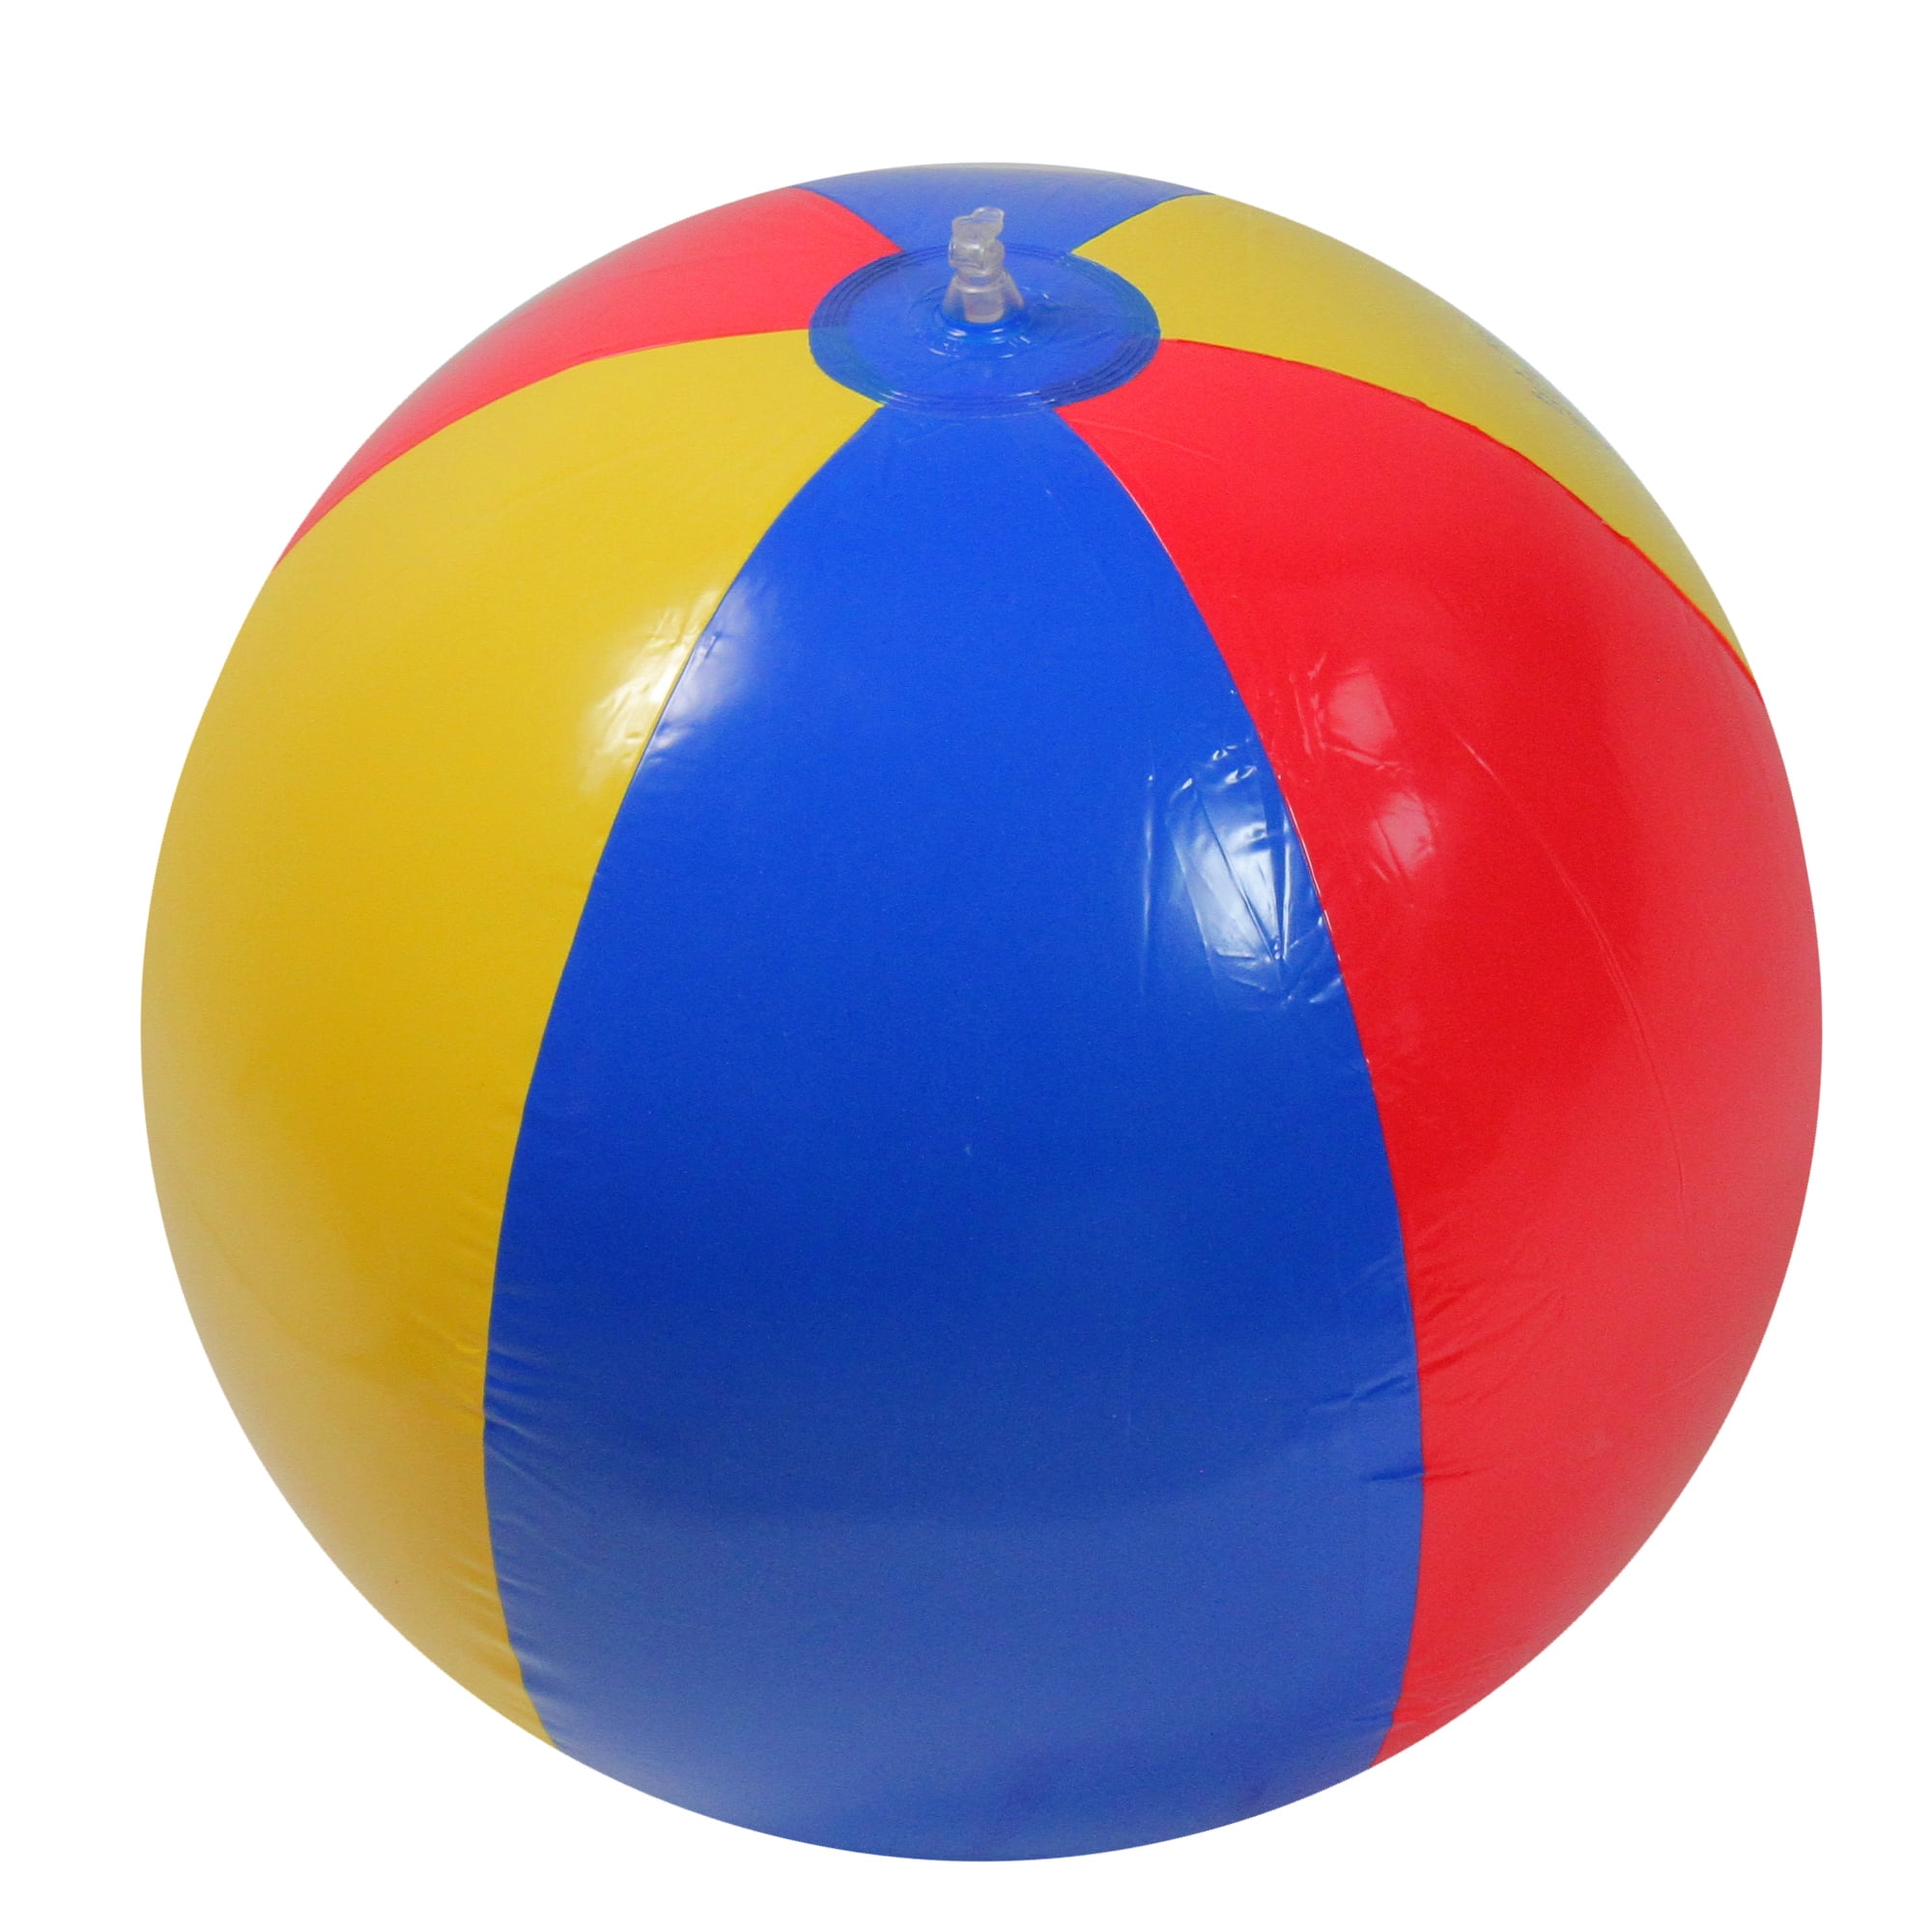 59030ep Intex 24 Inch Glossy Panel Colorful Beach Ball Inflatable for sale online 